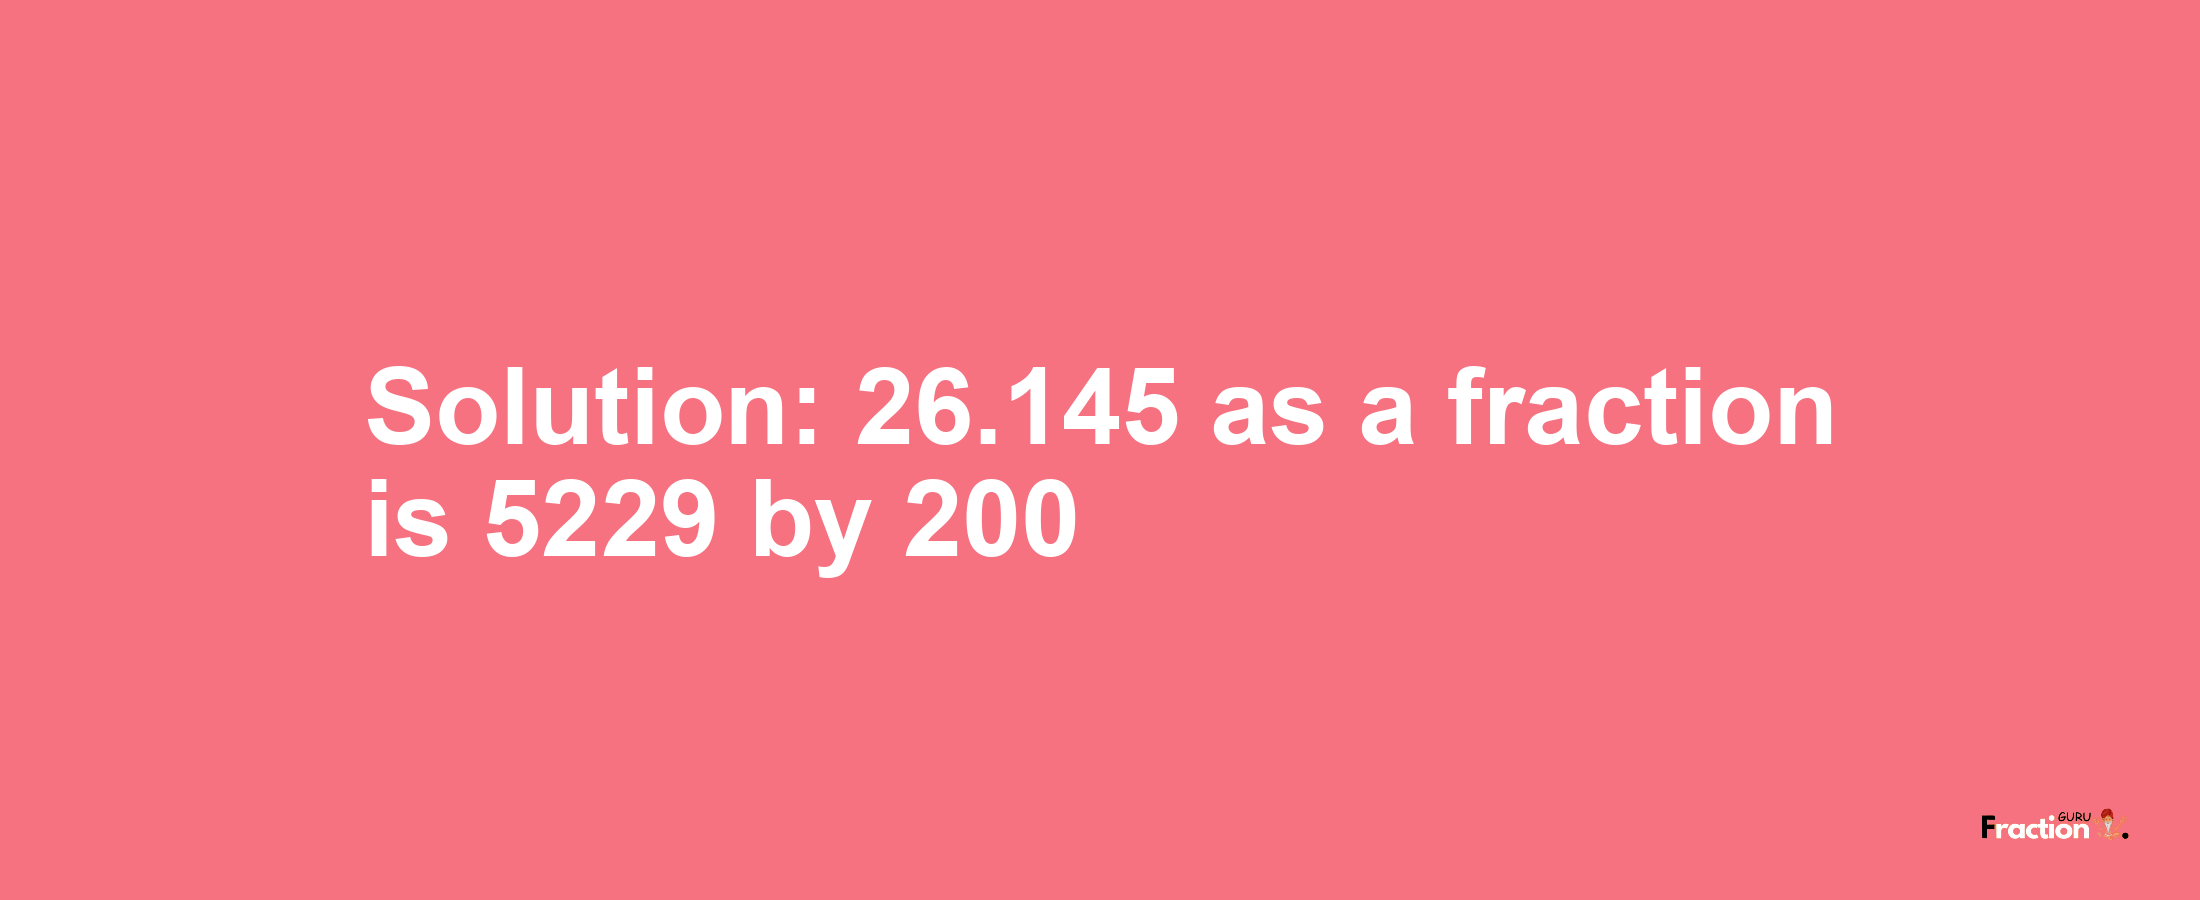 Solution:26.145 as a fraction is 5229/200